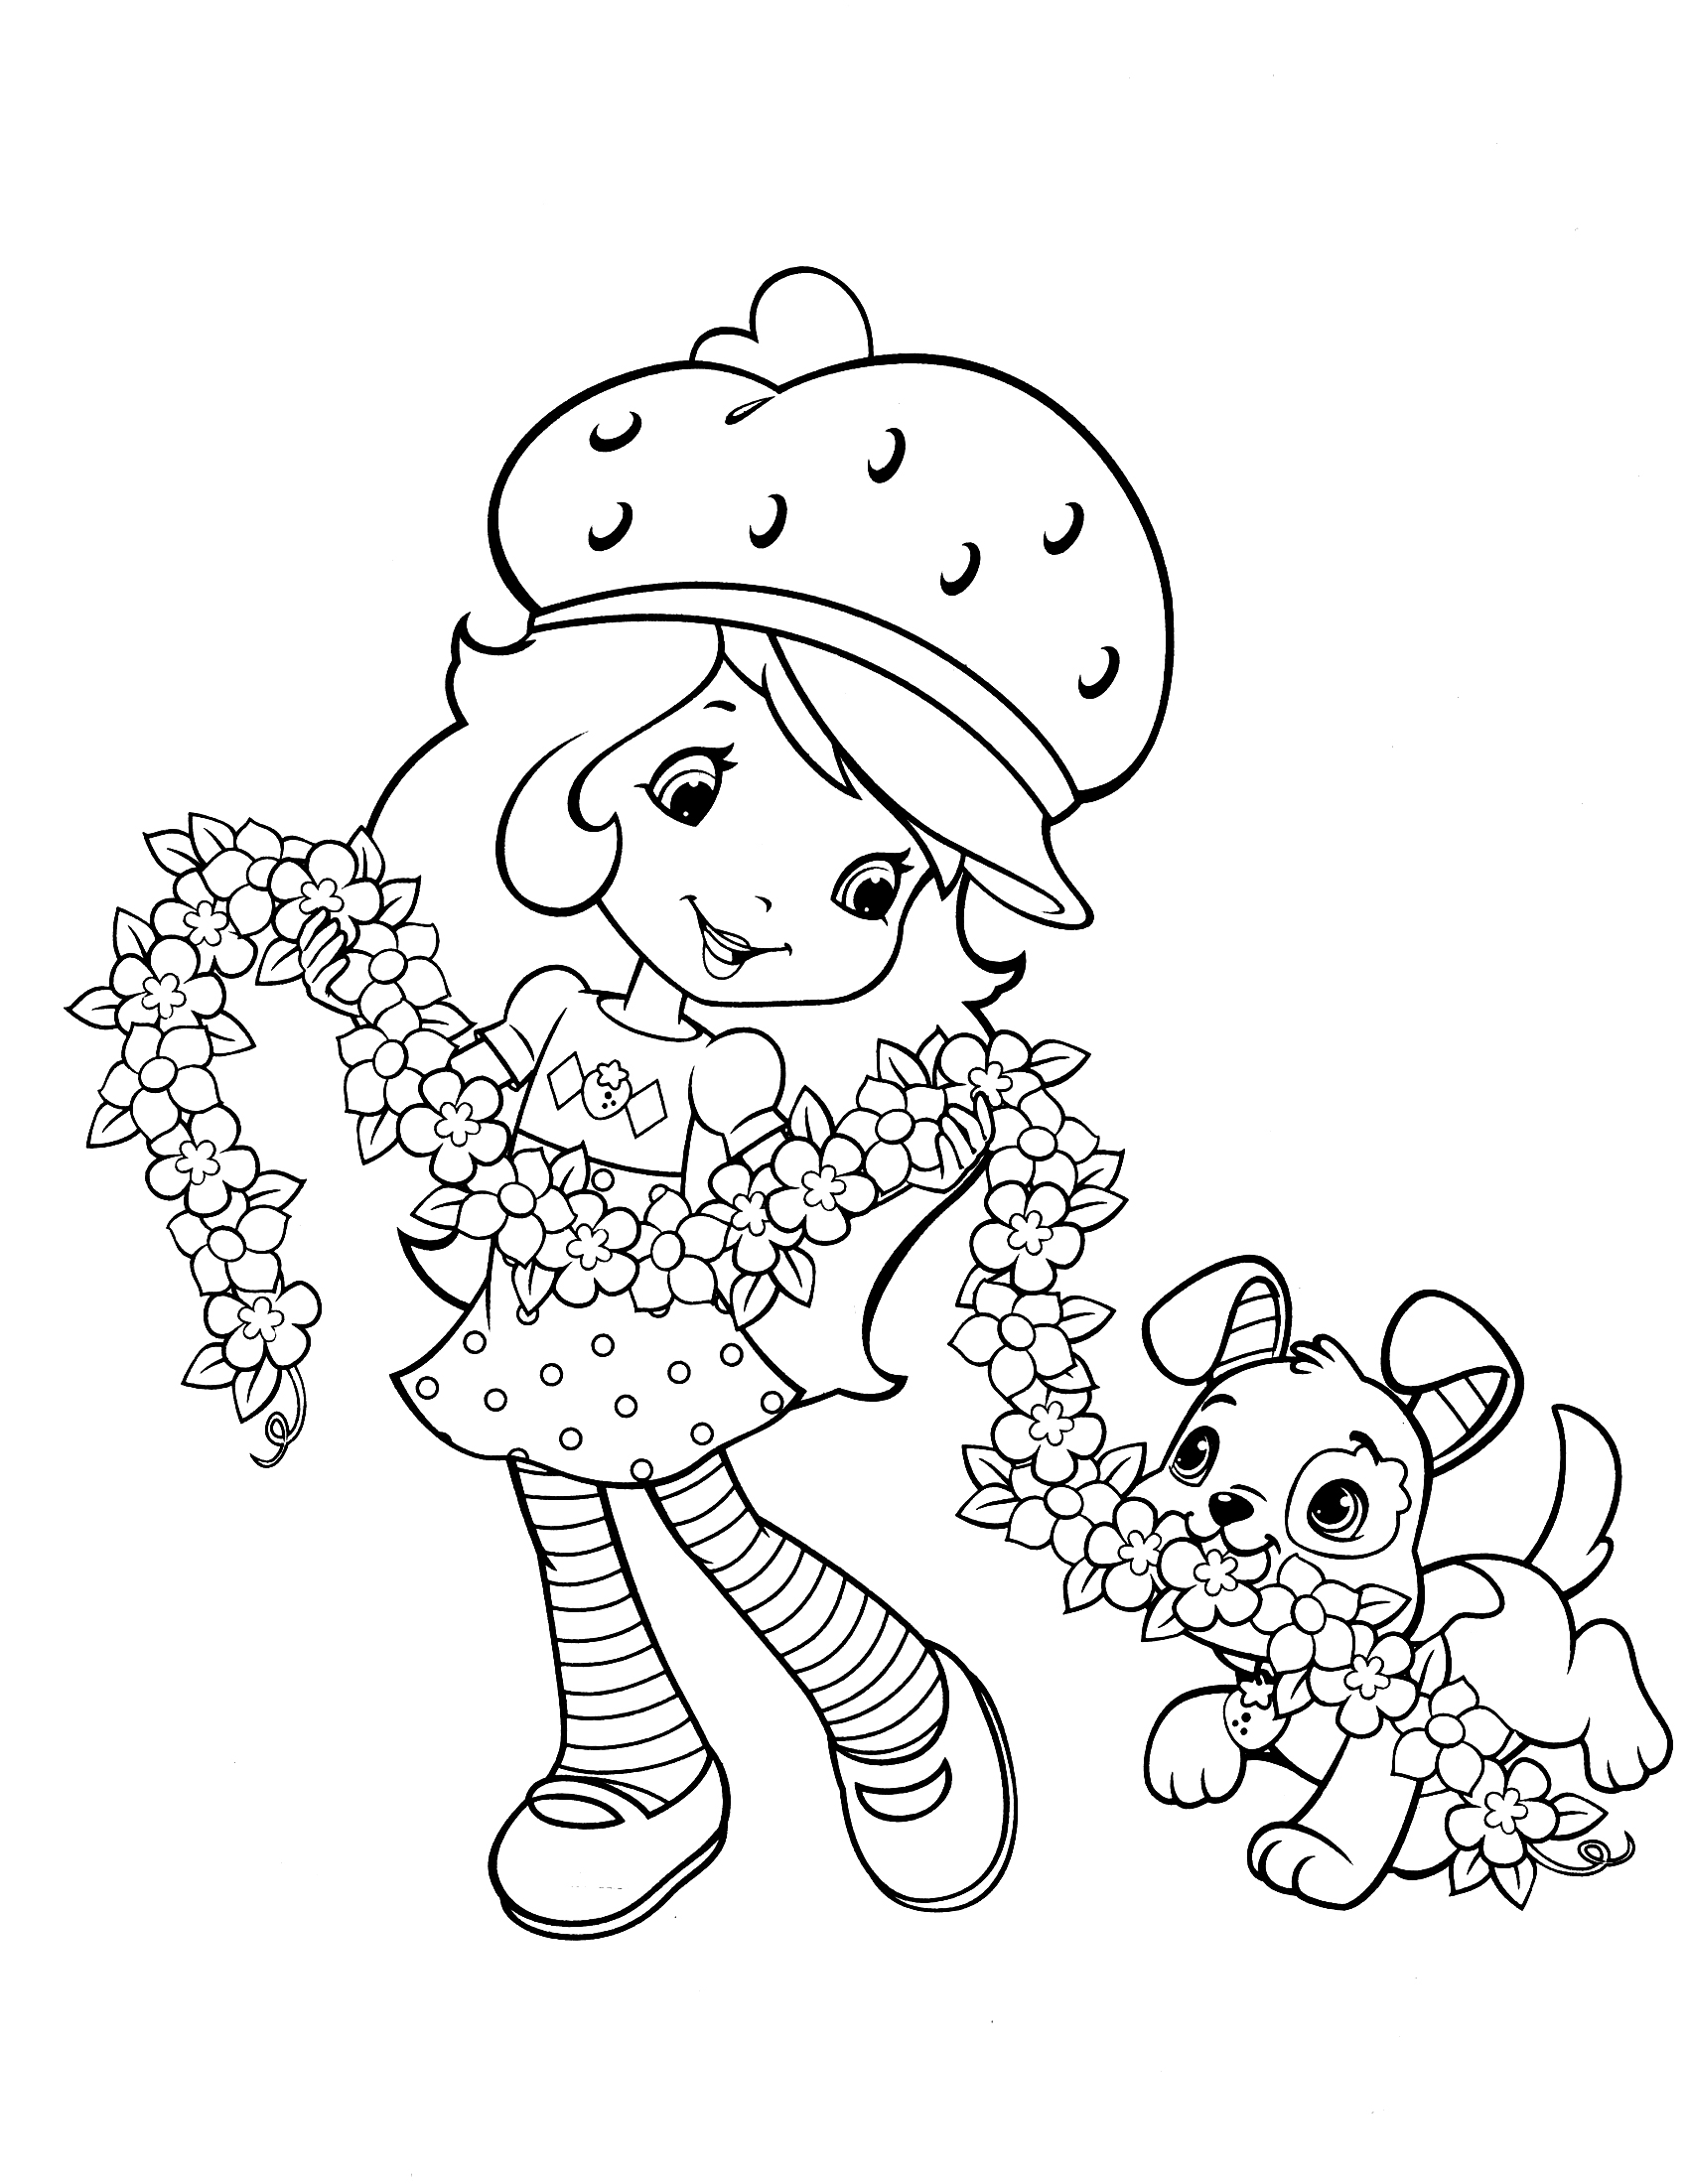  Strawberry Shortcake Coloring Pages / Cool coloring pages / 12